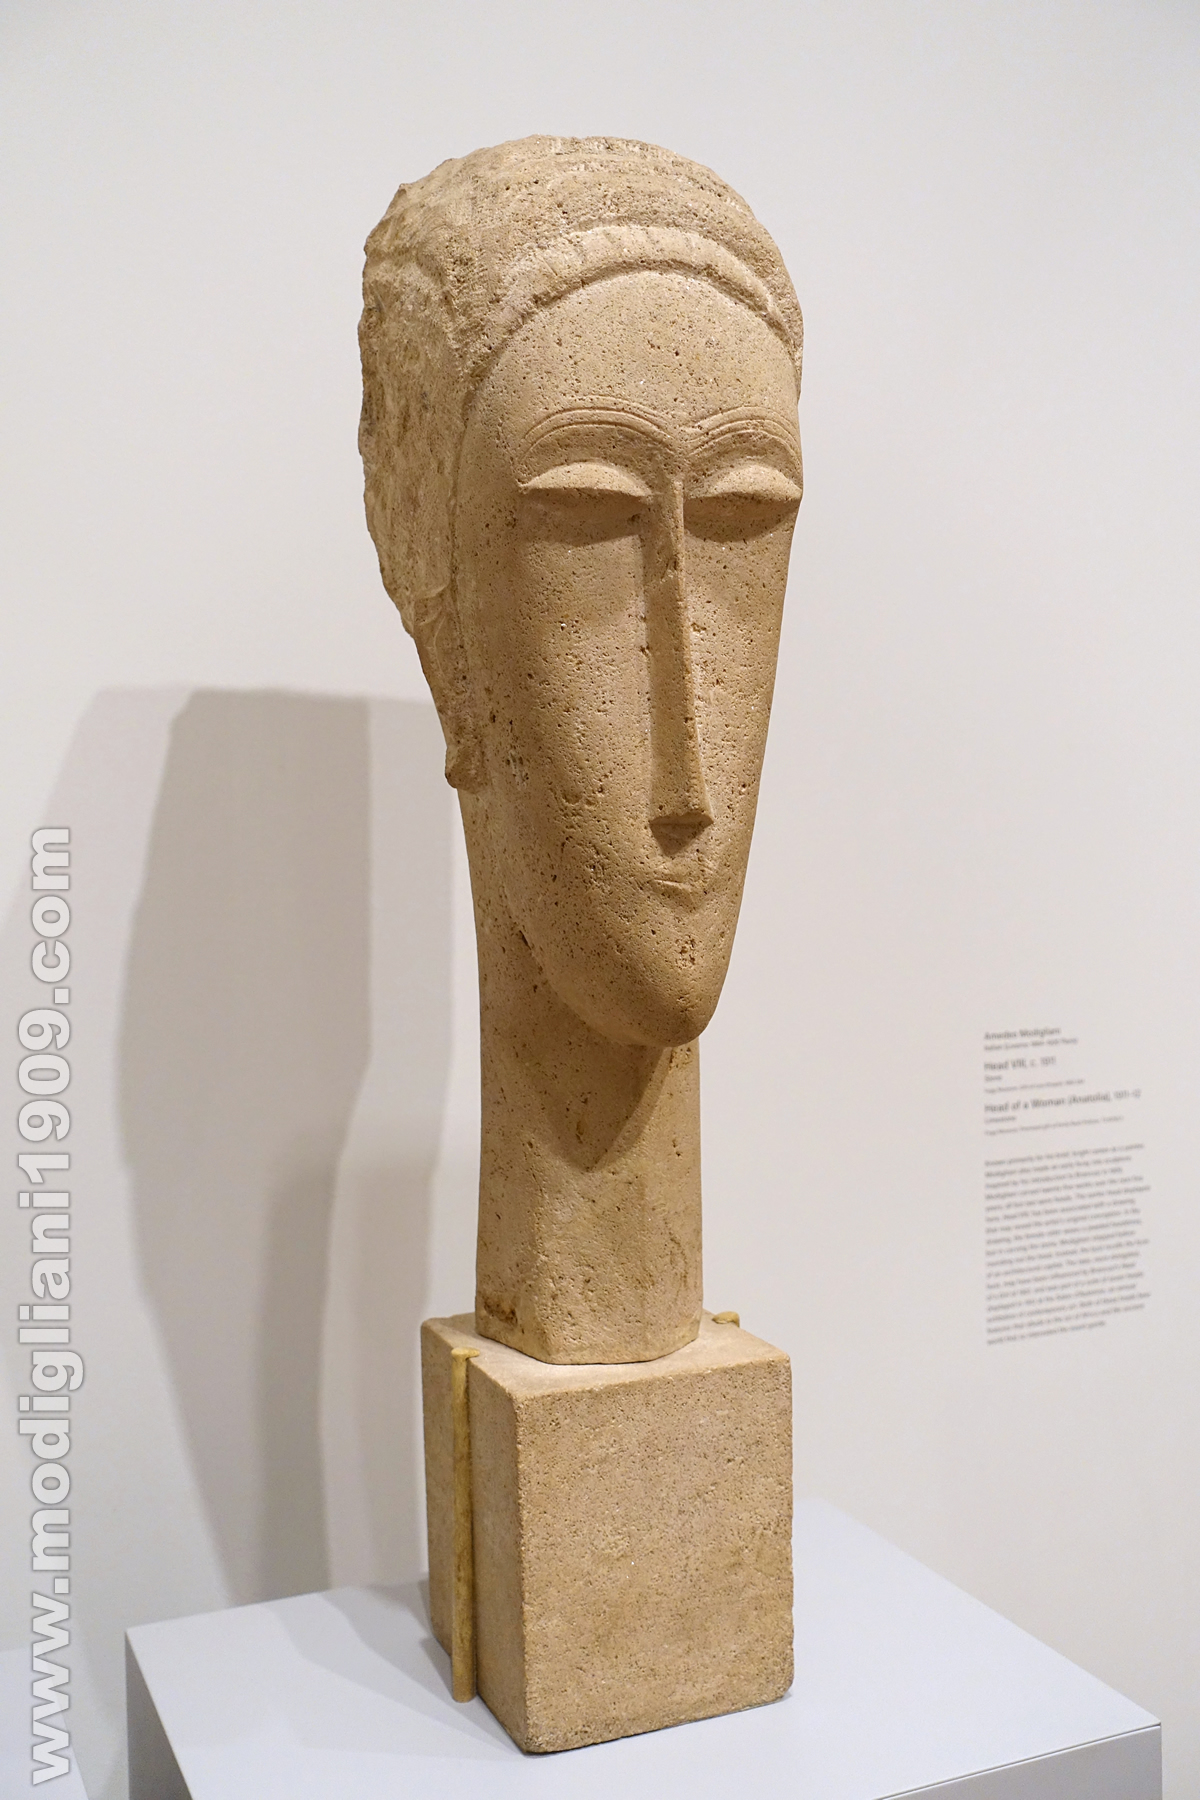 Head of woman, Amedeo Modigliani, 1910 - 1911, Sandstone, private collection (formerly Joseph Pulitzer Jr St.Louis Missouri Collection)